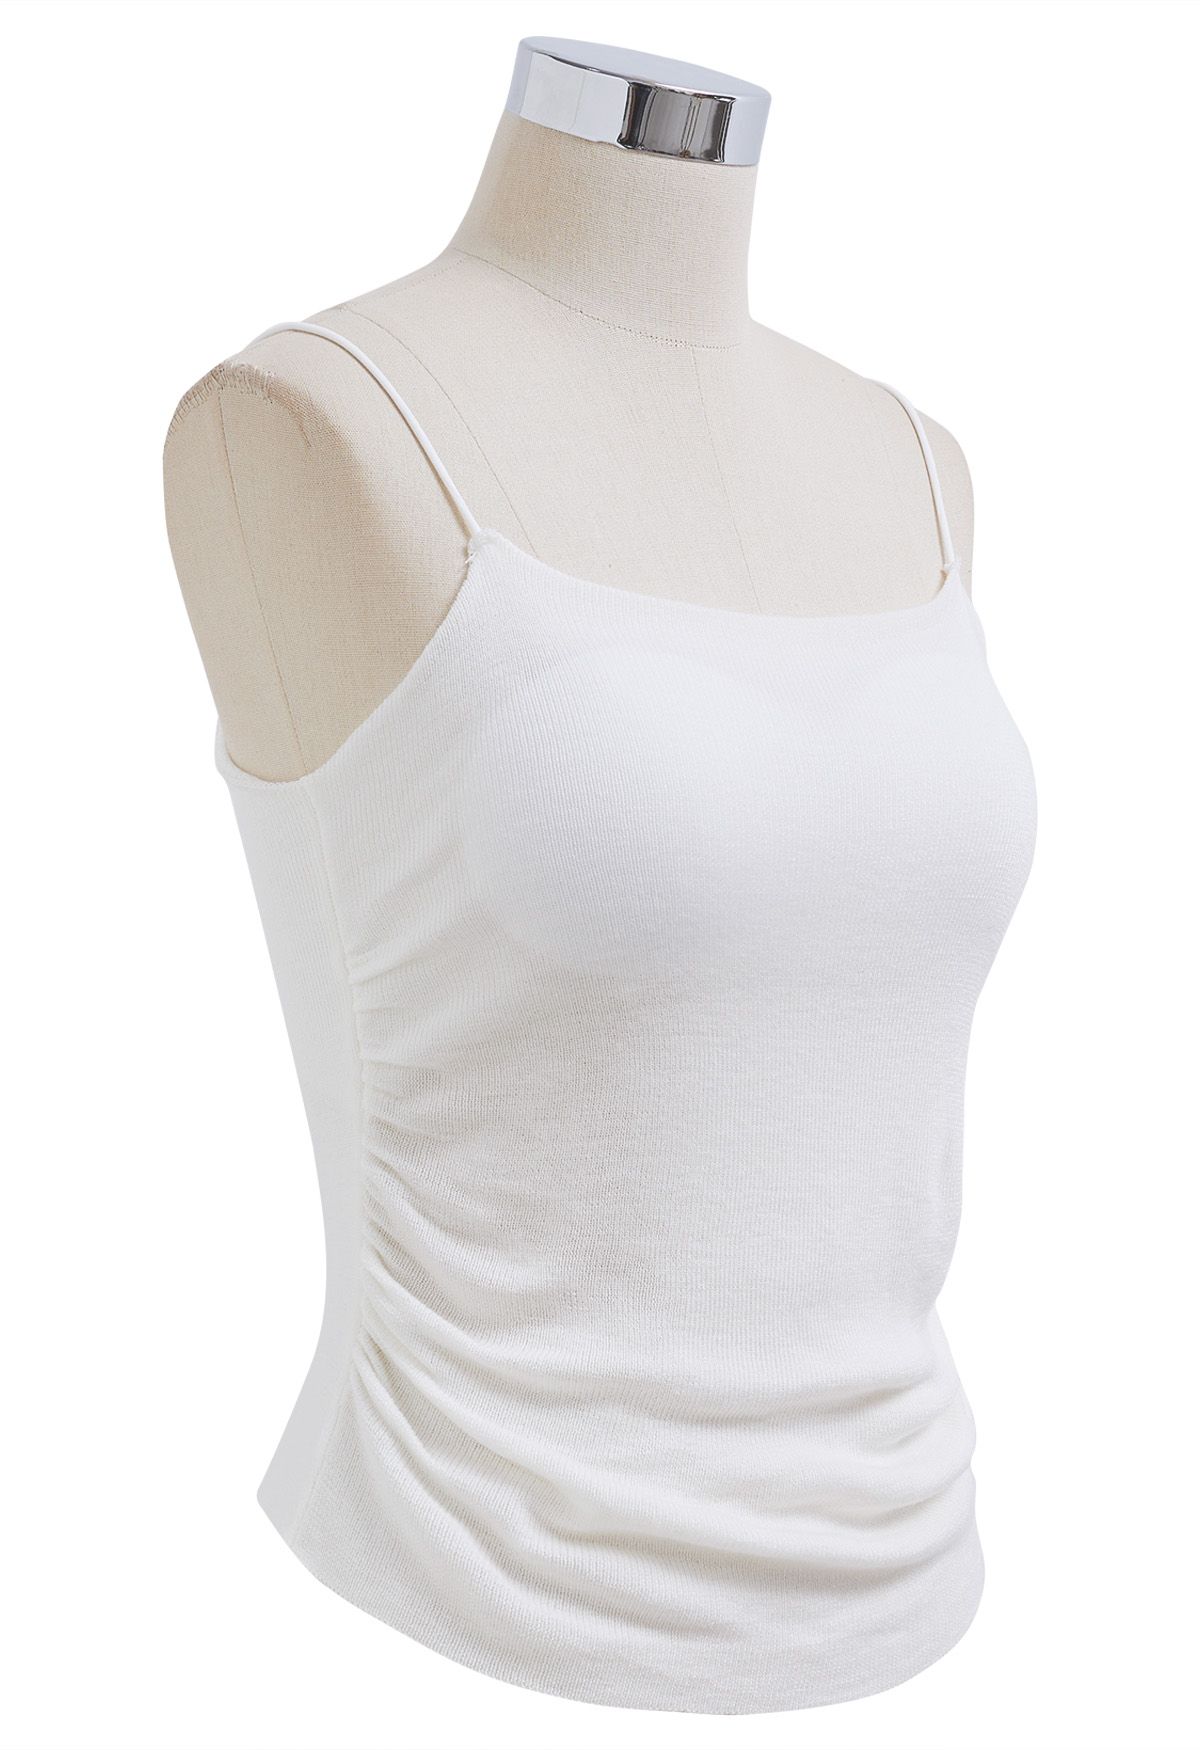 Versatile Ruched Knit Cami Top in White